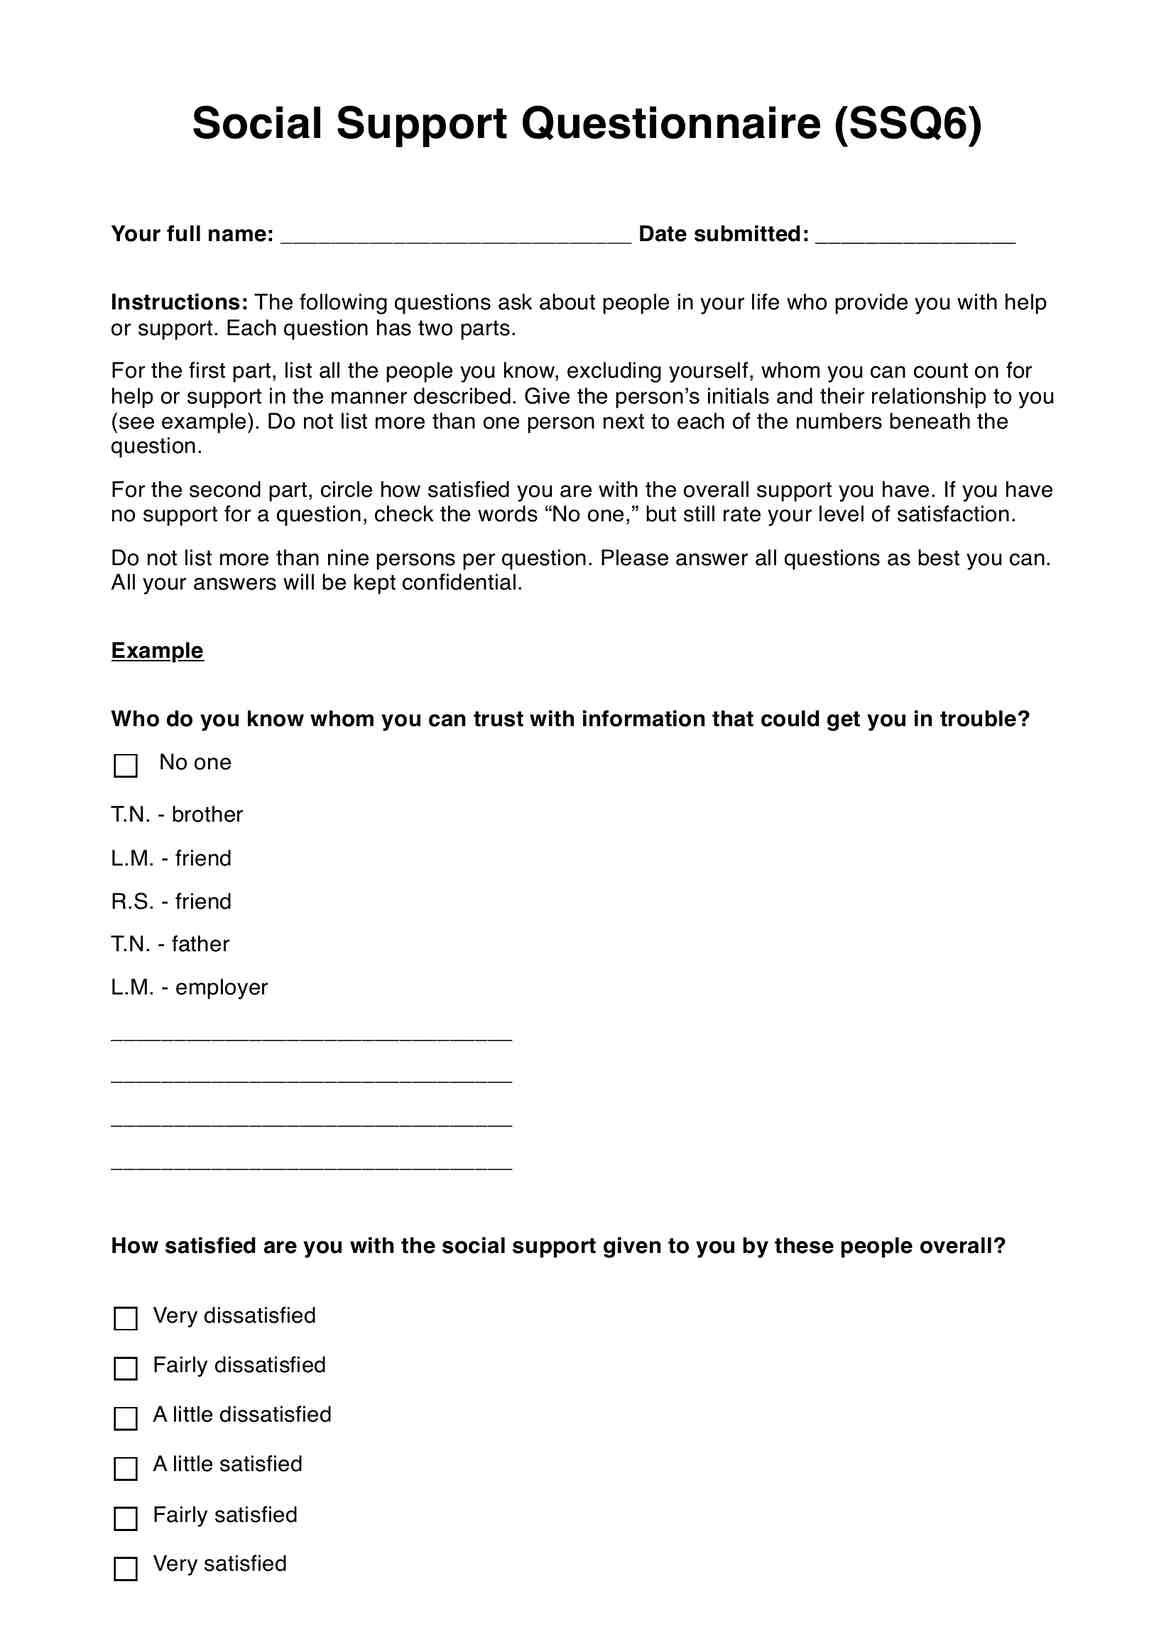 Social Support Questionnaire (SSQ6) PDF Example